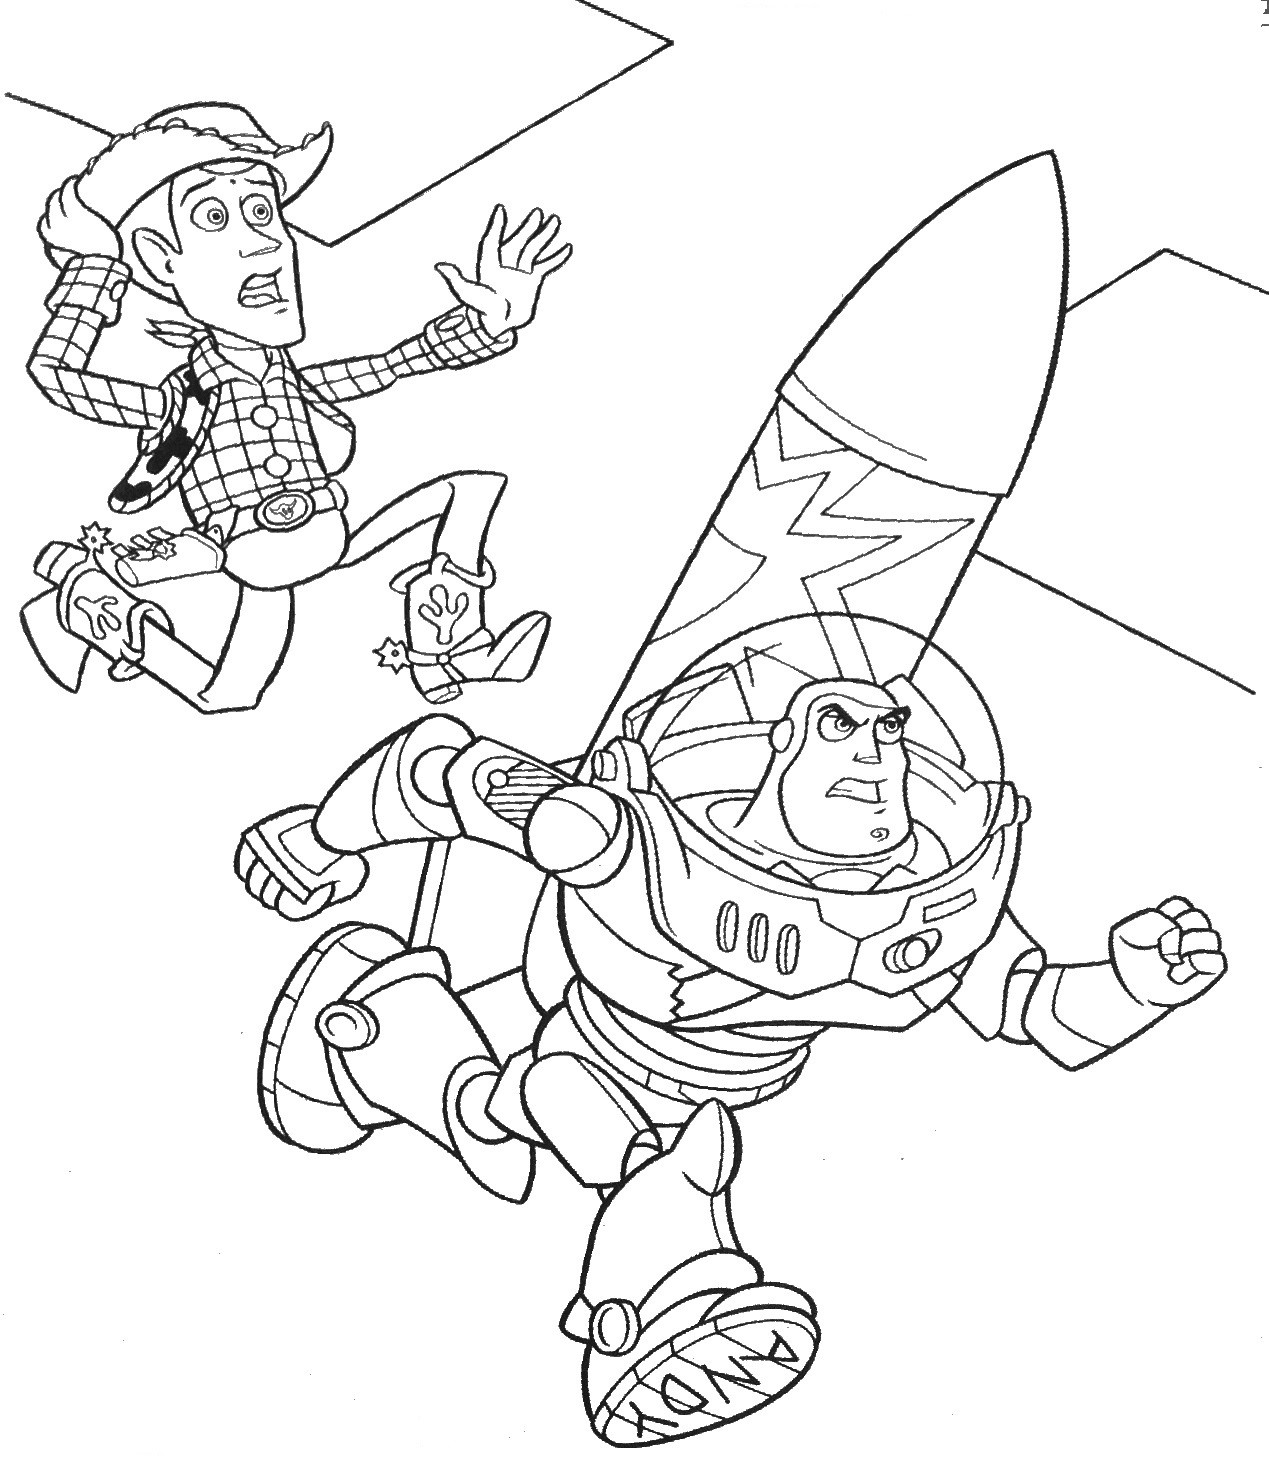 Toy Story Coloring Pages Buzz And Woody at GetDrawings Free download